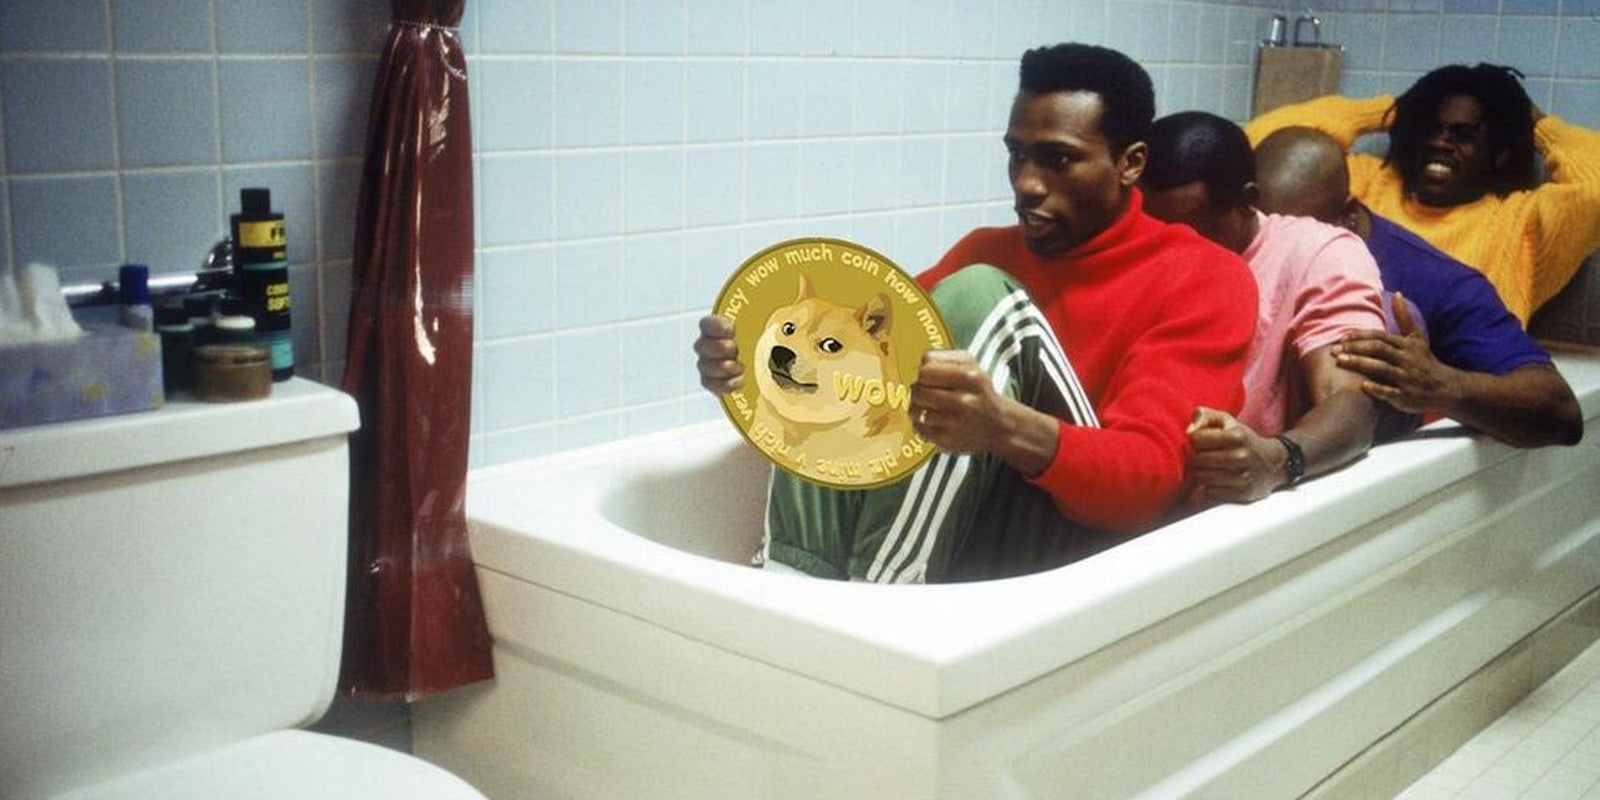 Cool Runnings Jamaican bobsled team in bathtub holding Dogecoin